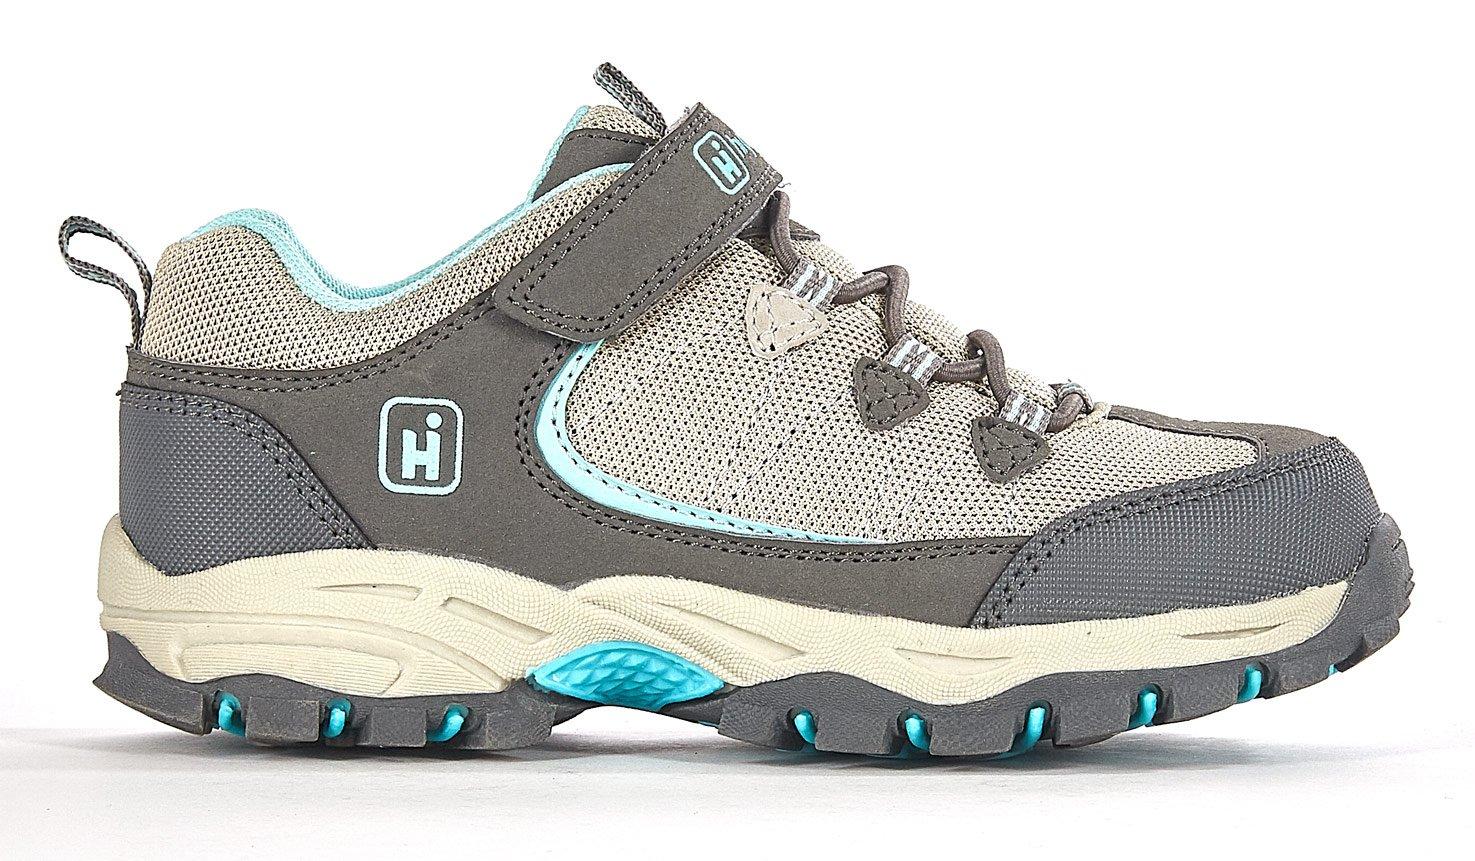 childrens walking boots go outdoors